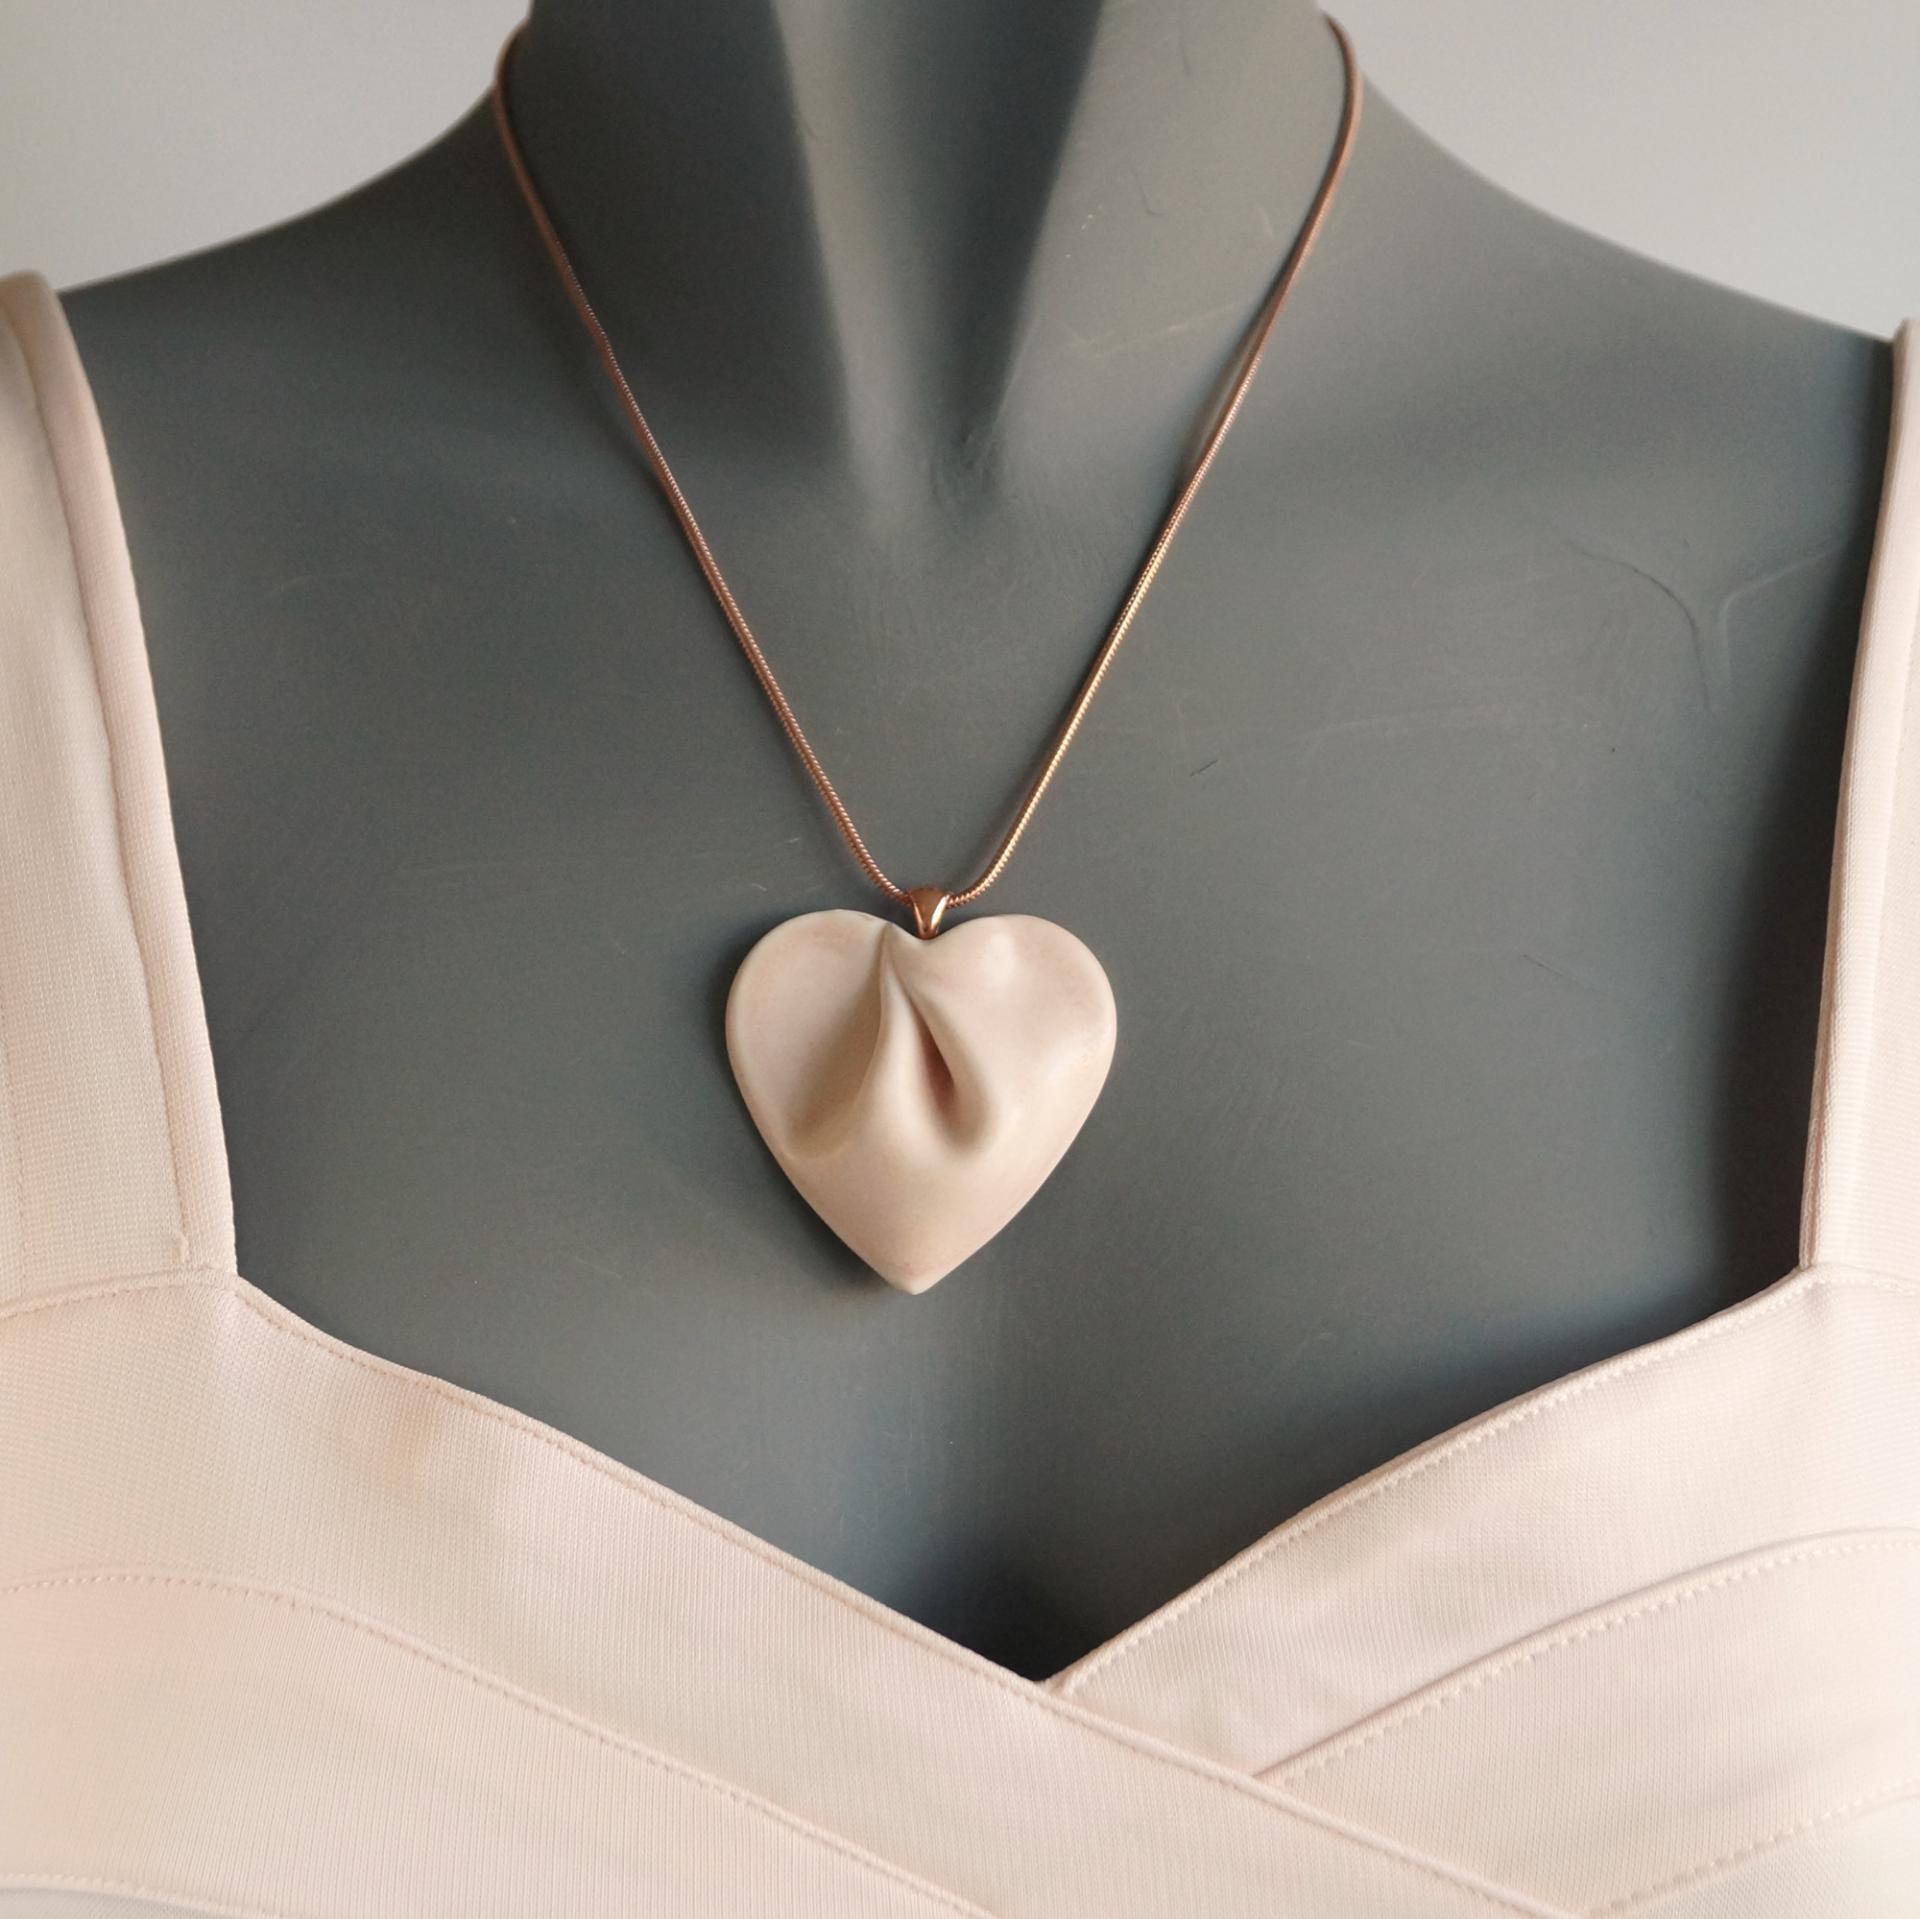 porcelain gift, draped heart necklace, pink satin, snake chain, rose gold necklace, stainless steel, omega necklet, VanillaKi